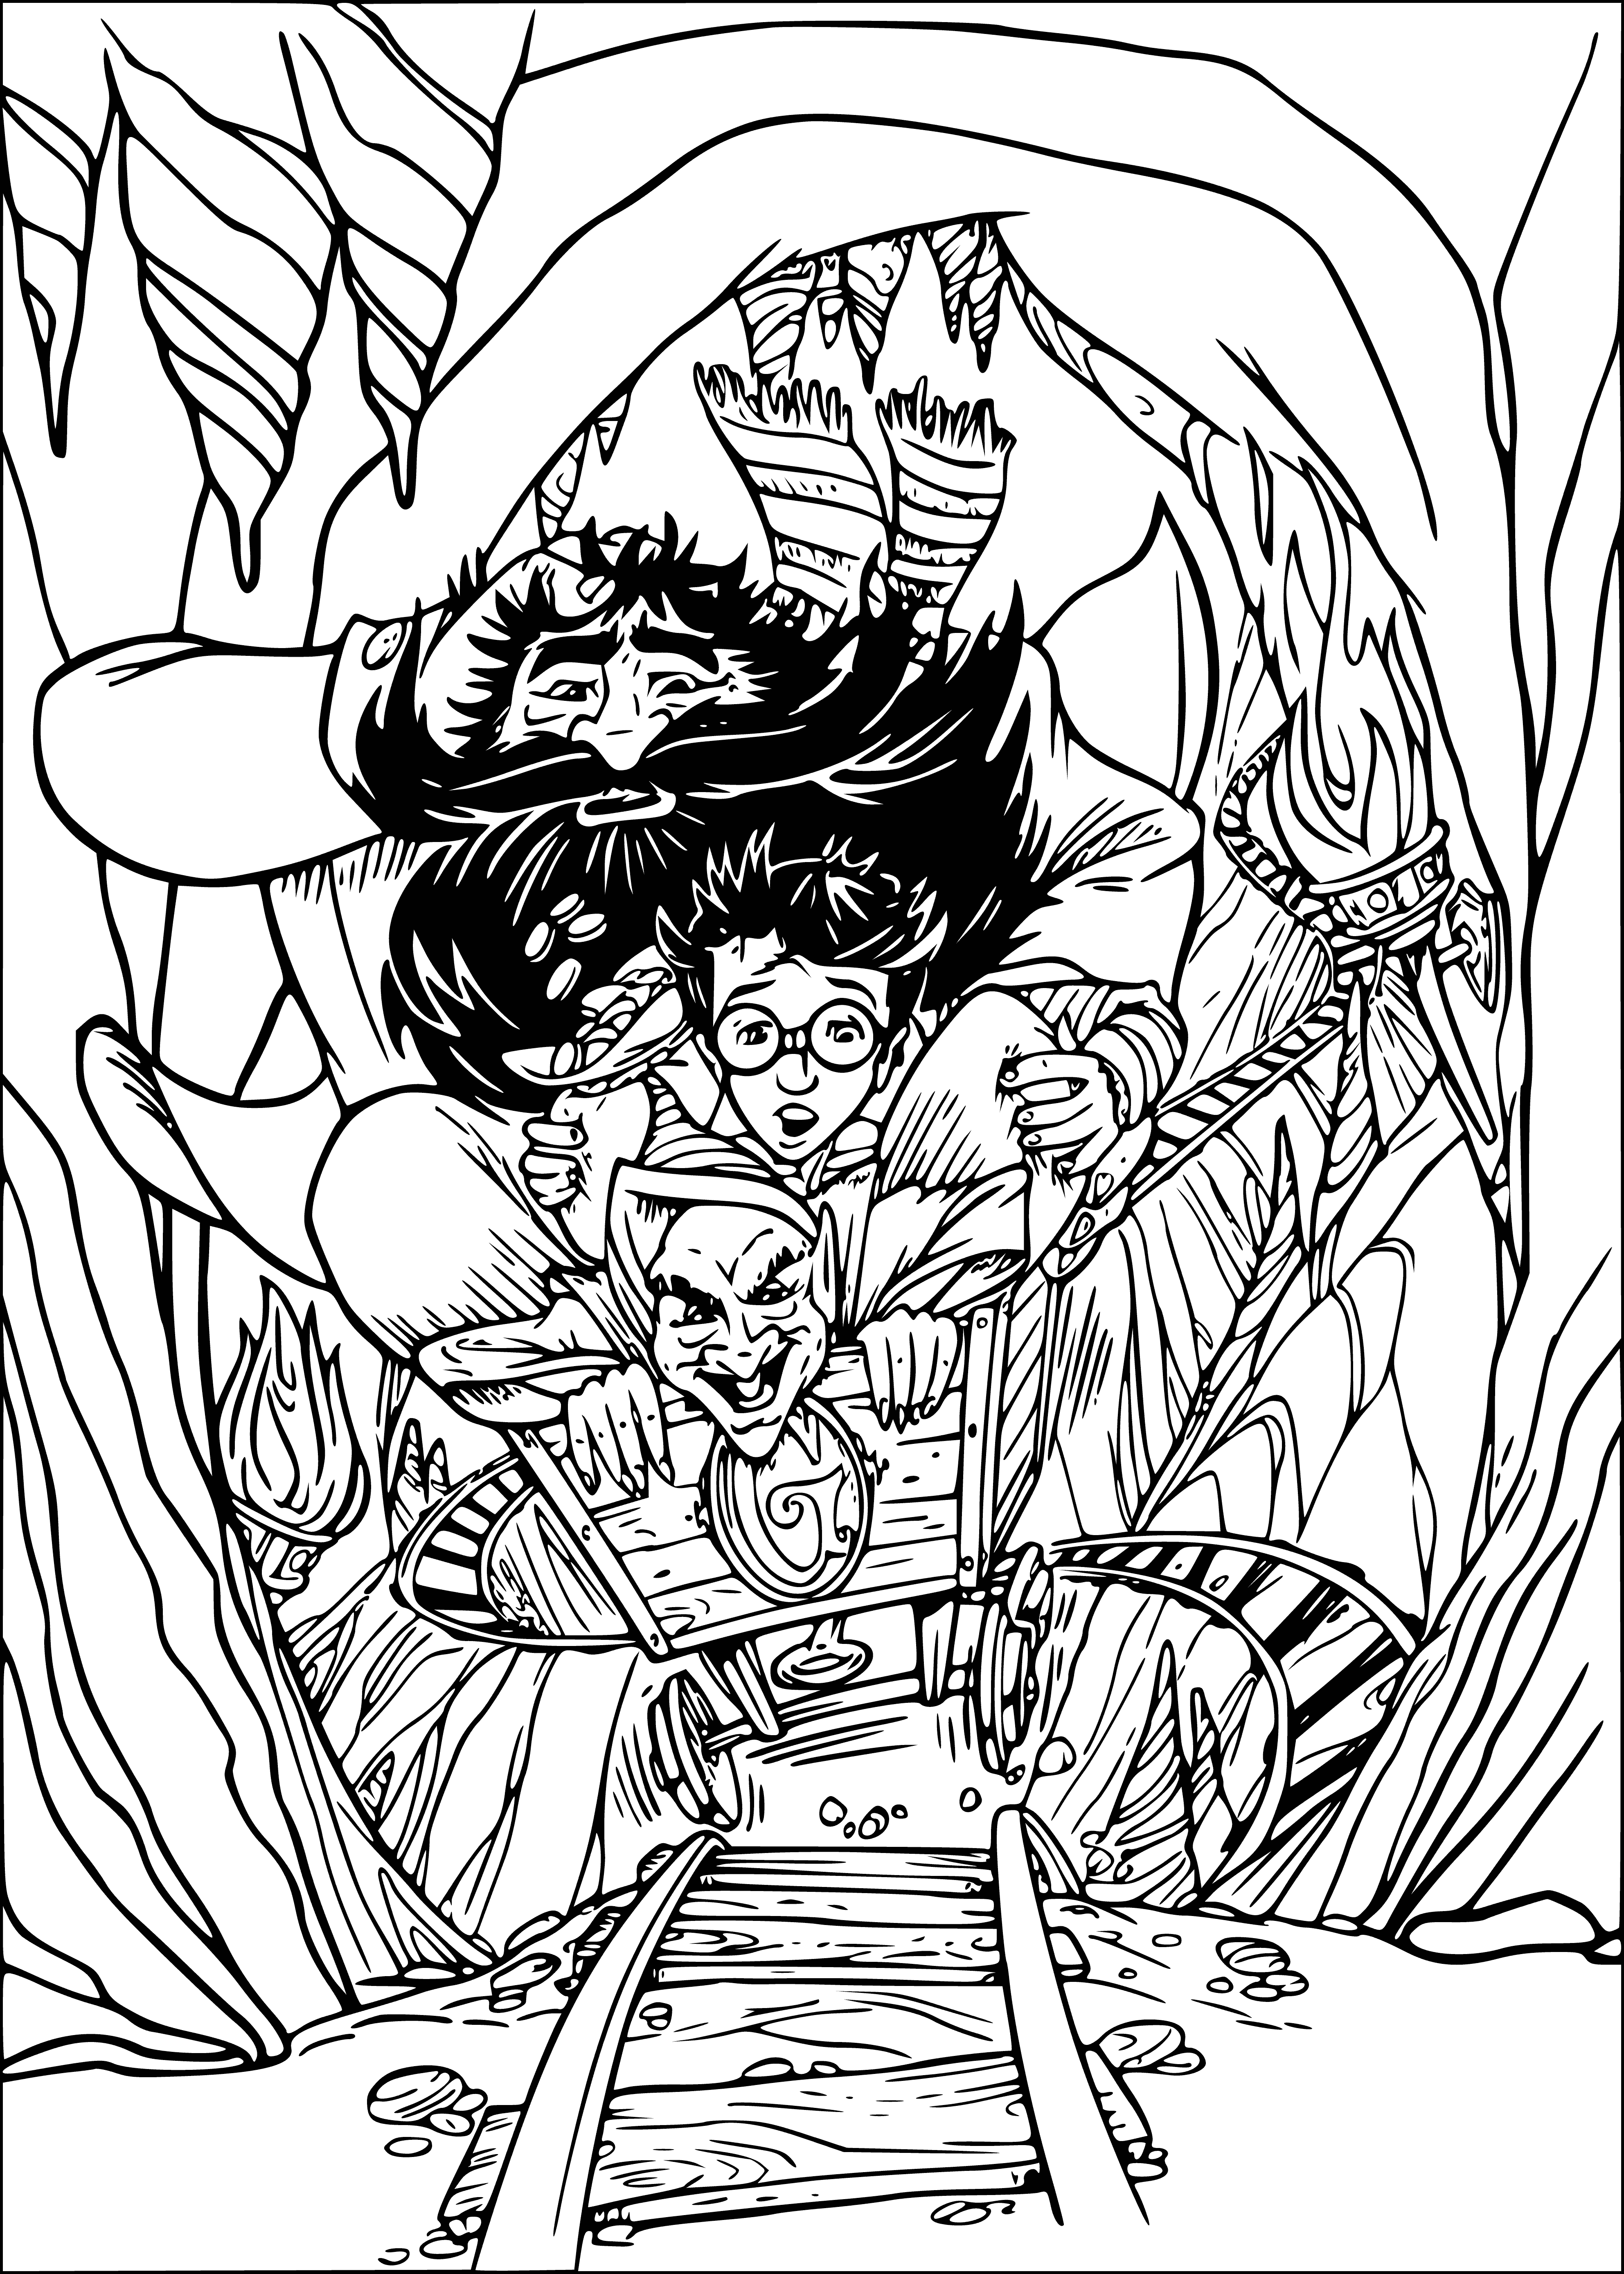 Harry potter in the jar coloring page